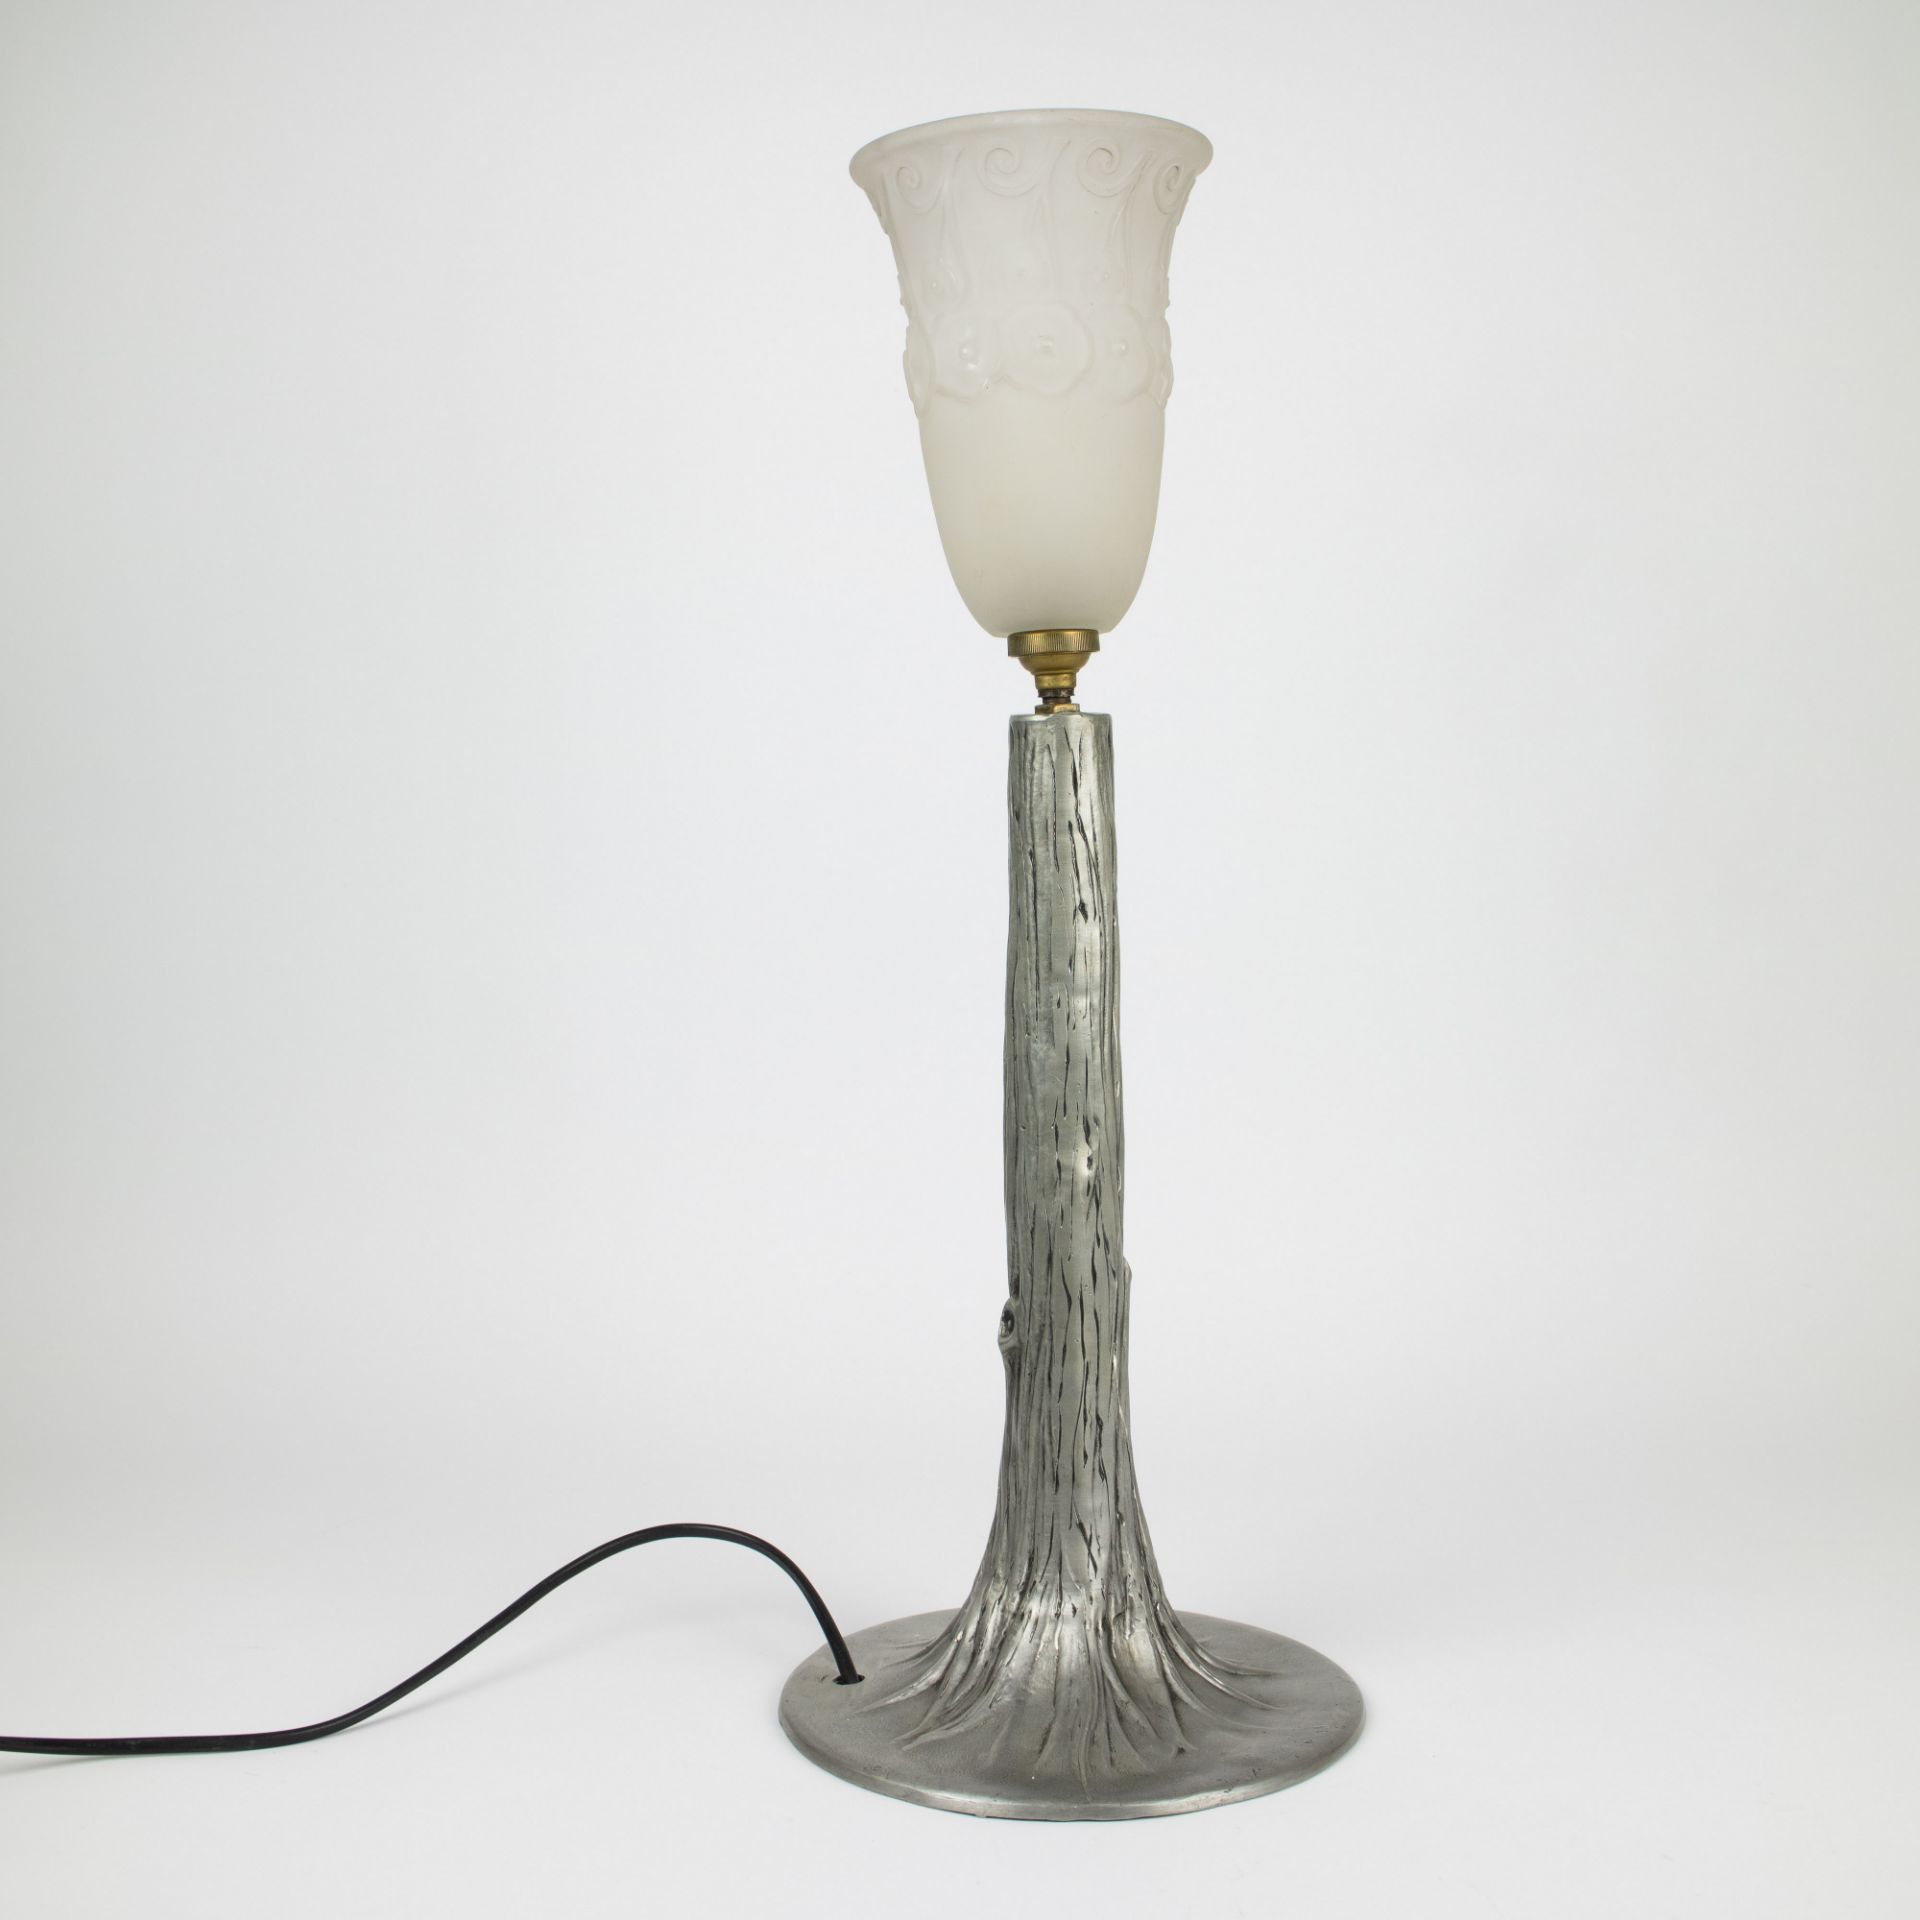 Muller Frères table lamp in silver plated bronze - Image 2 of 4